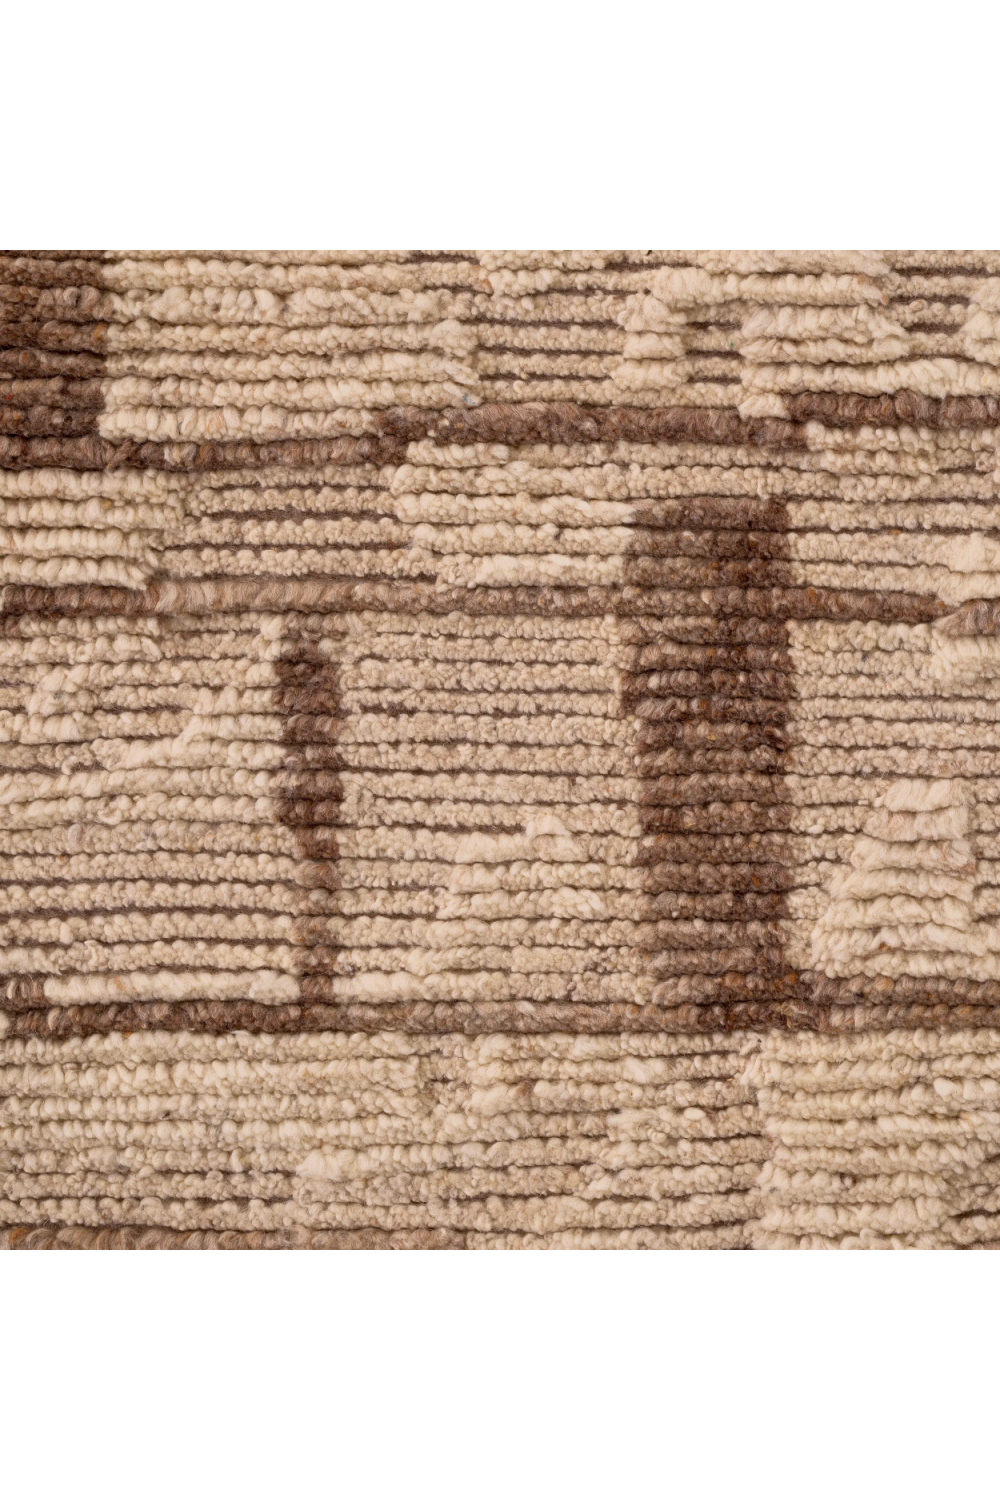 Hand-Knotted Brown Wool Carpet | Eichholtz Limitless | Oroa.com